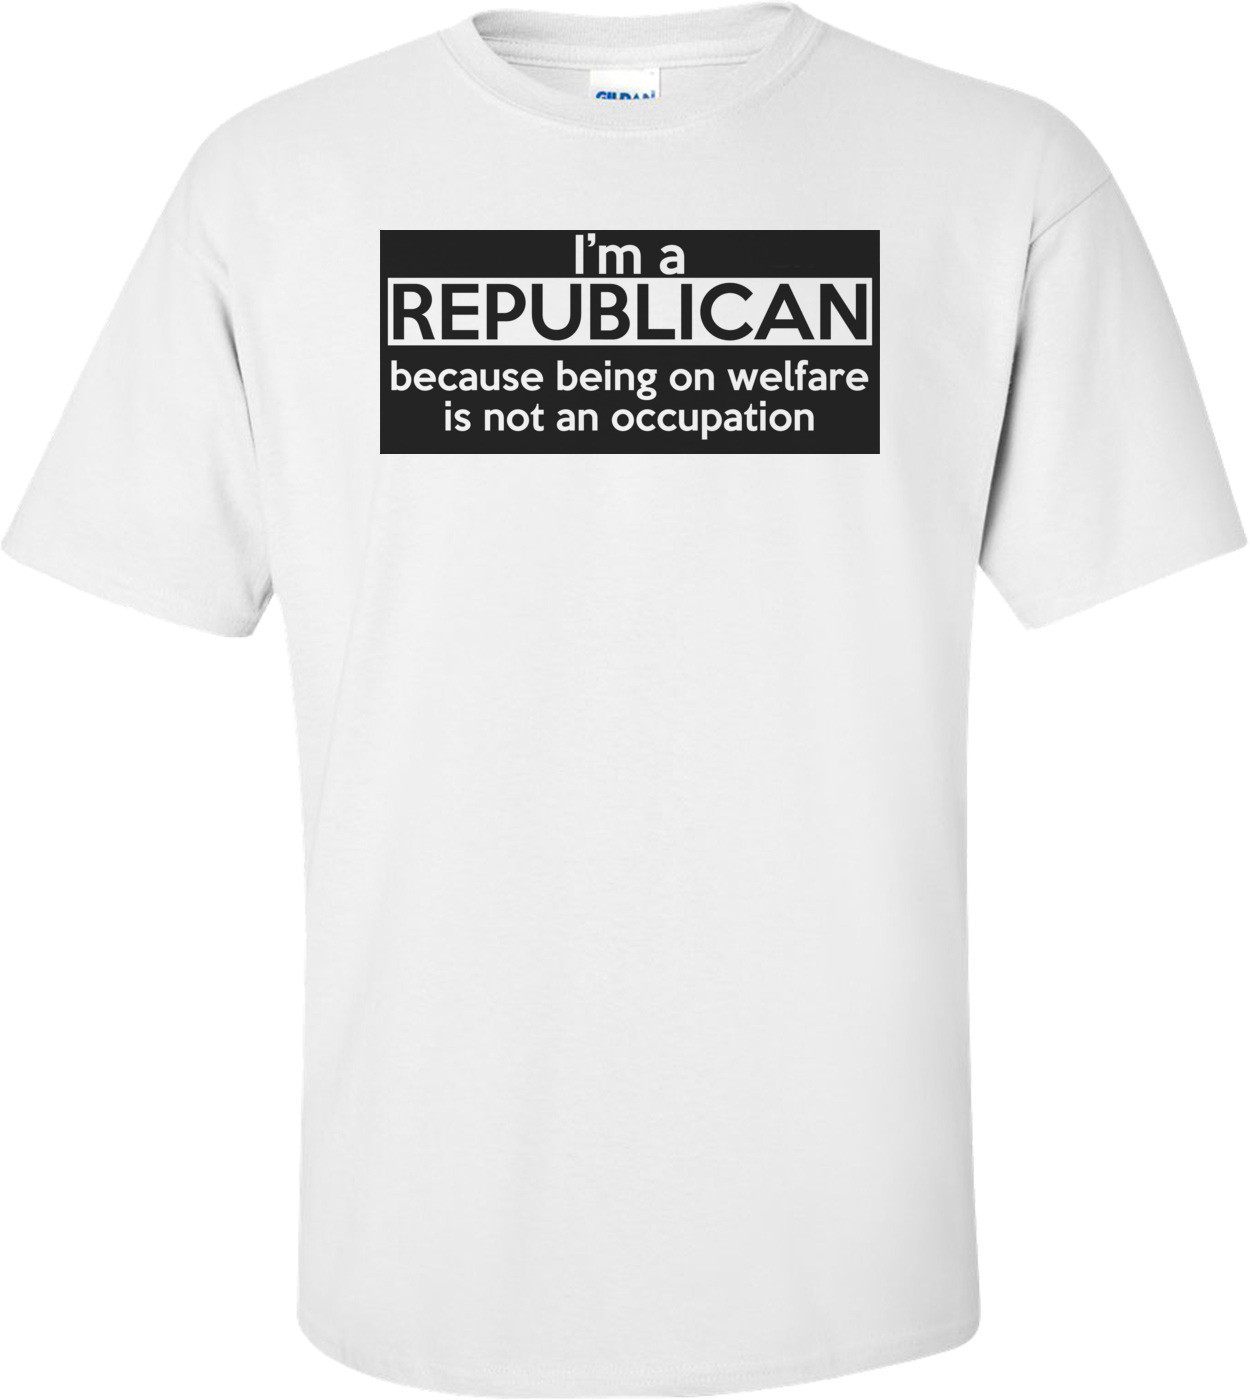 I'm A Republican Because Being On Welfare Is Not An Occupation Shirt